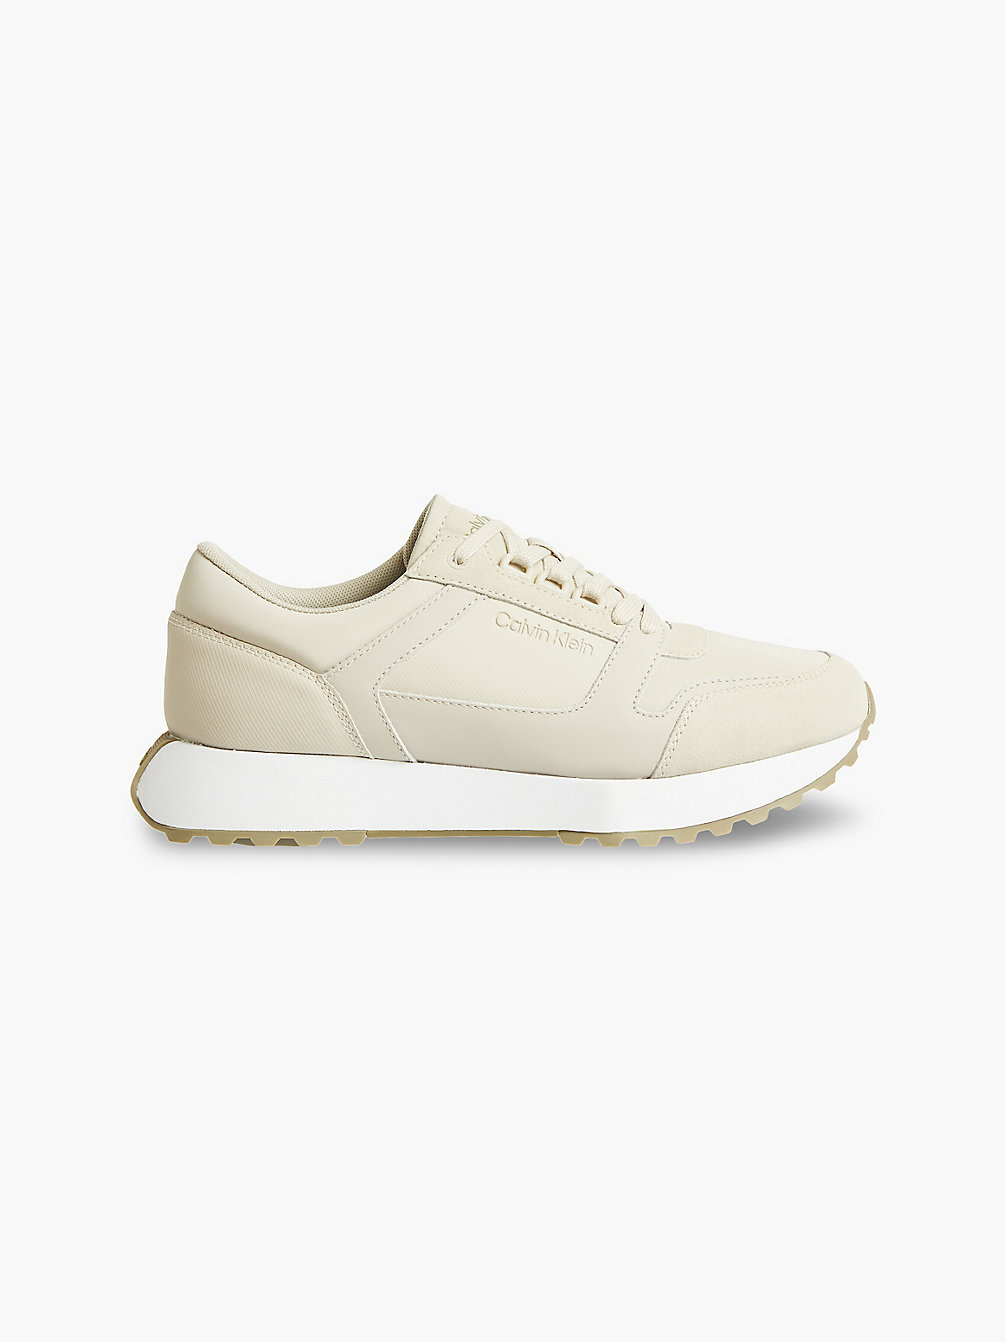 FEATHER GRAY/WHITE/ALOE Leather Trainers undefined men Calvin Klein